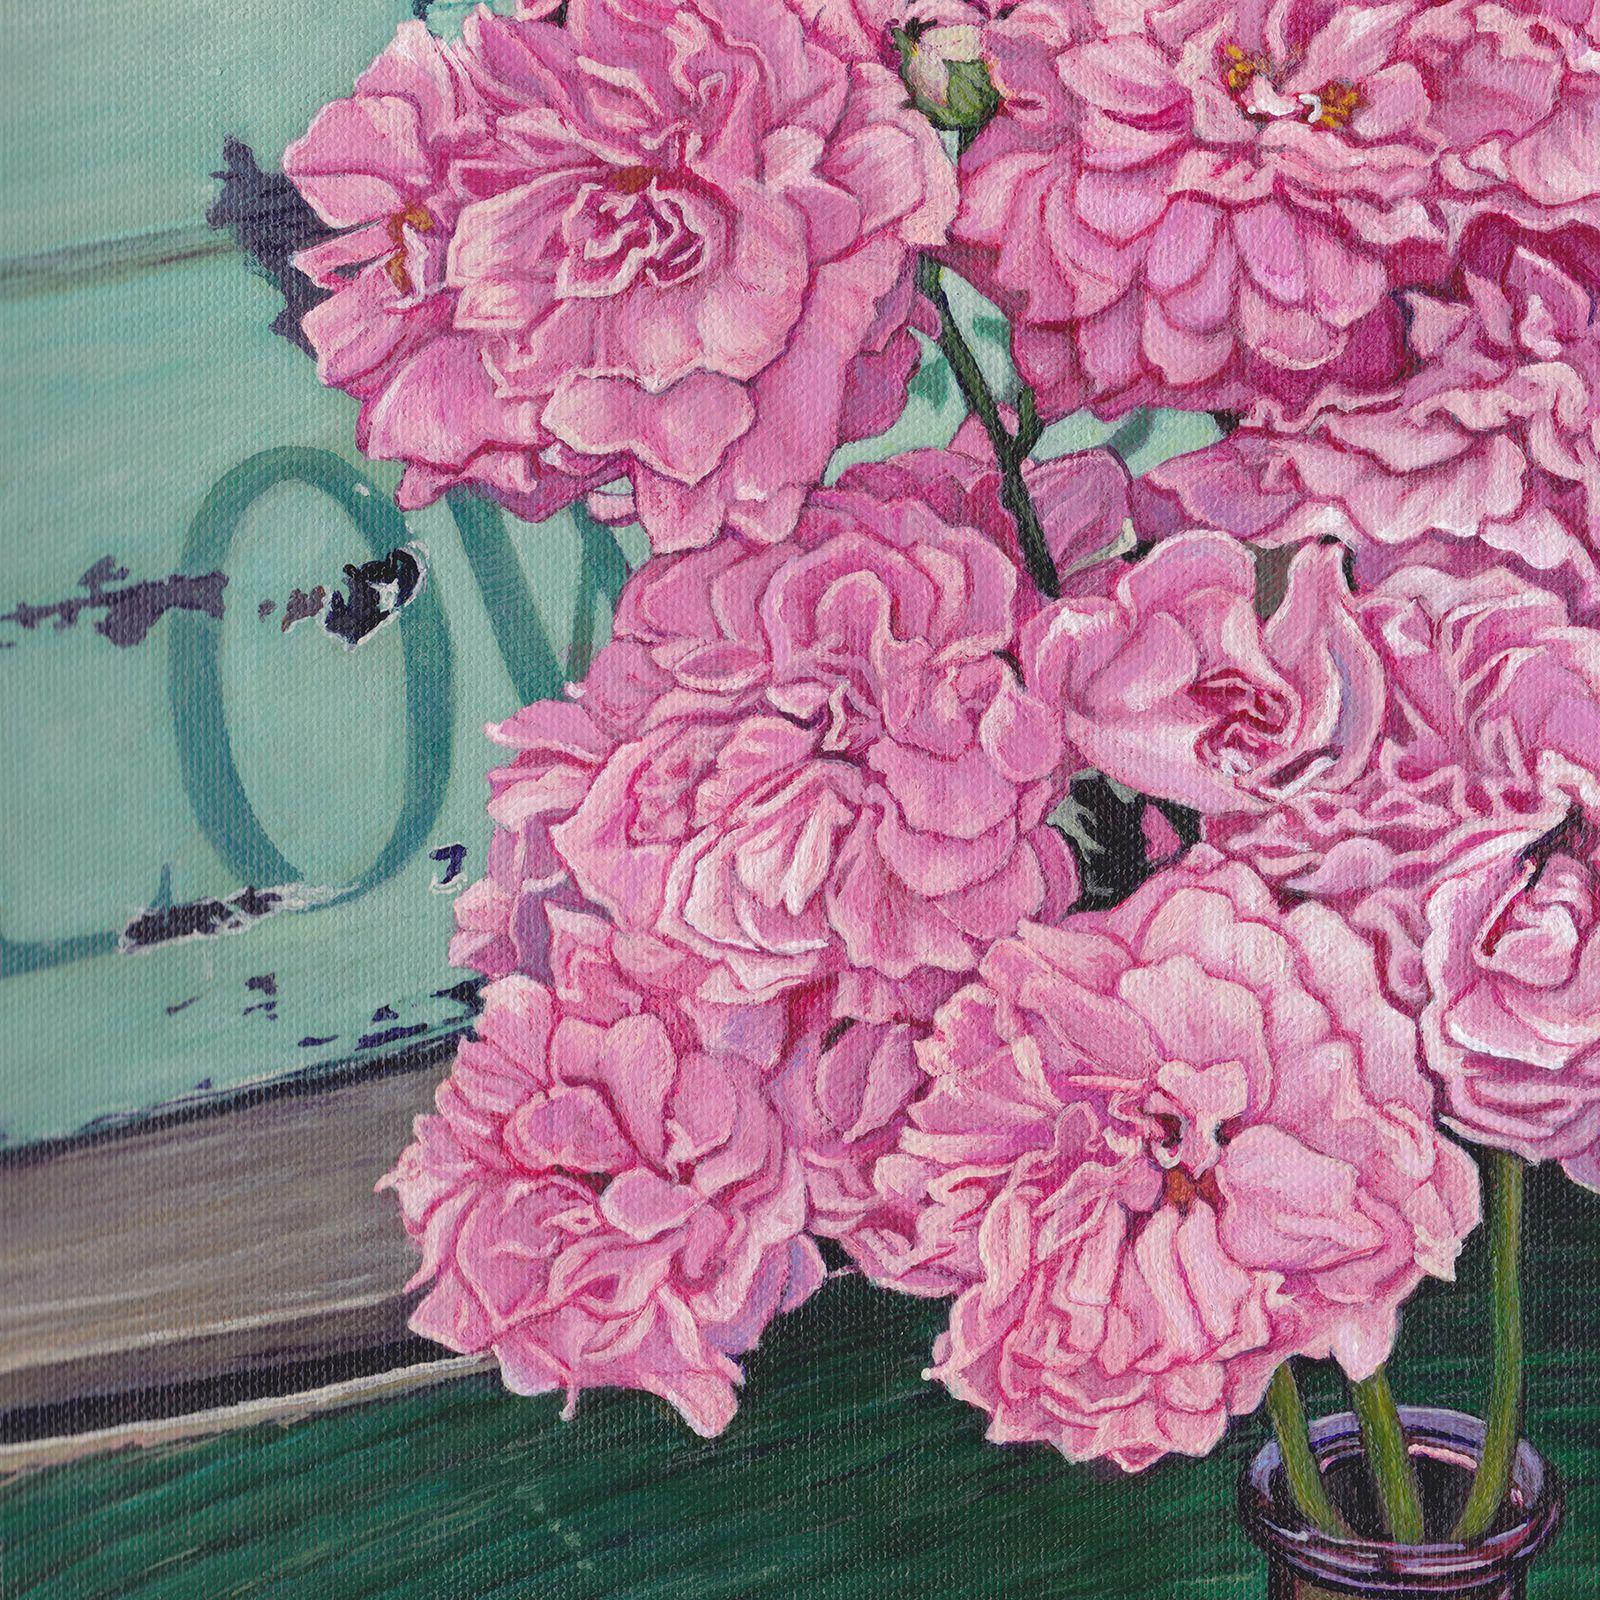 Peonies at the Farmers Market, Painting, Acrylic on Canvas 1